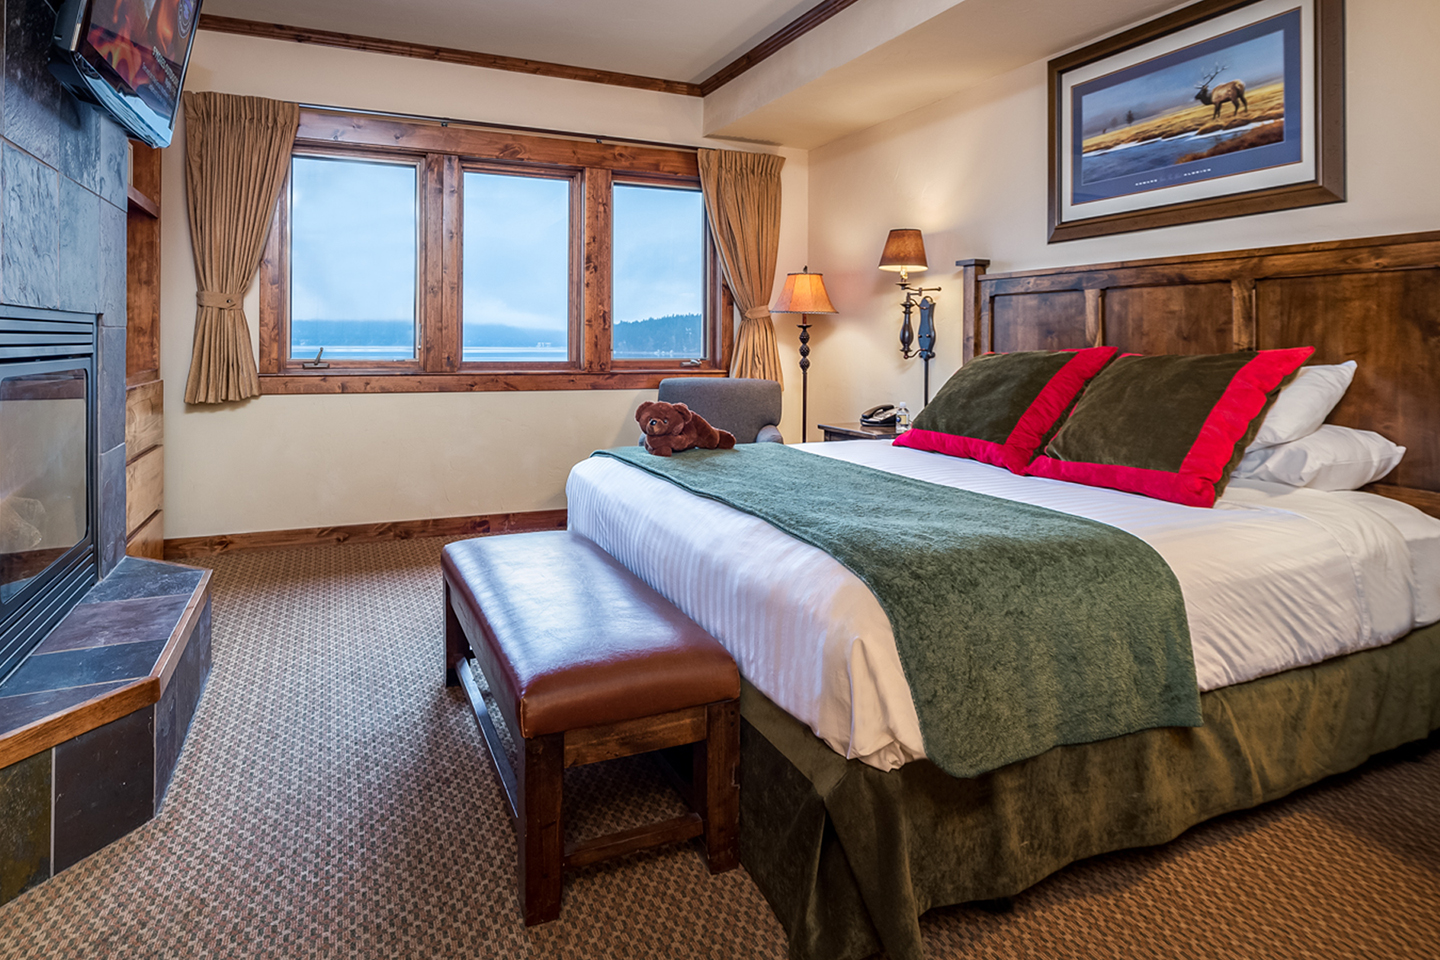 Every room at The Lodge at Whitefish Lake offers a cozy fireplace. – Michael Klippert